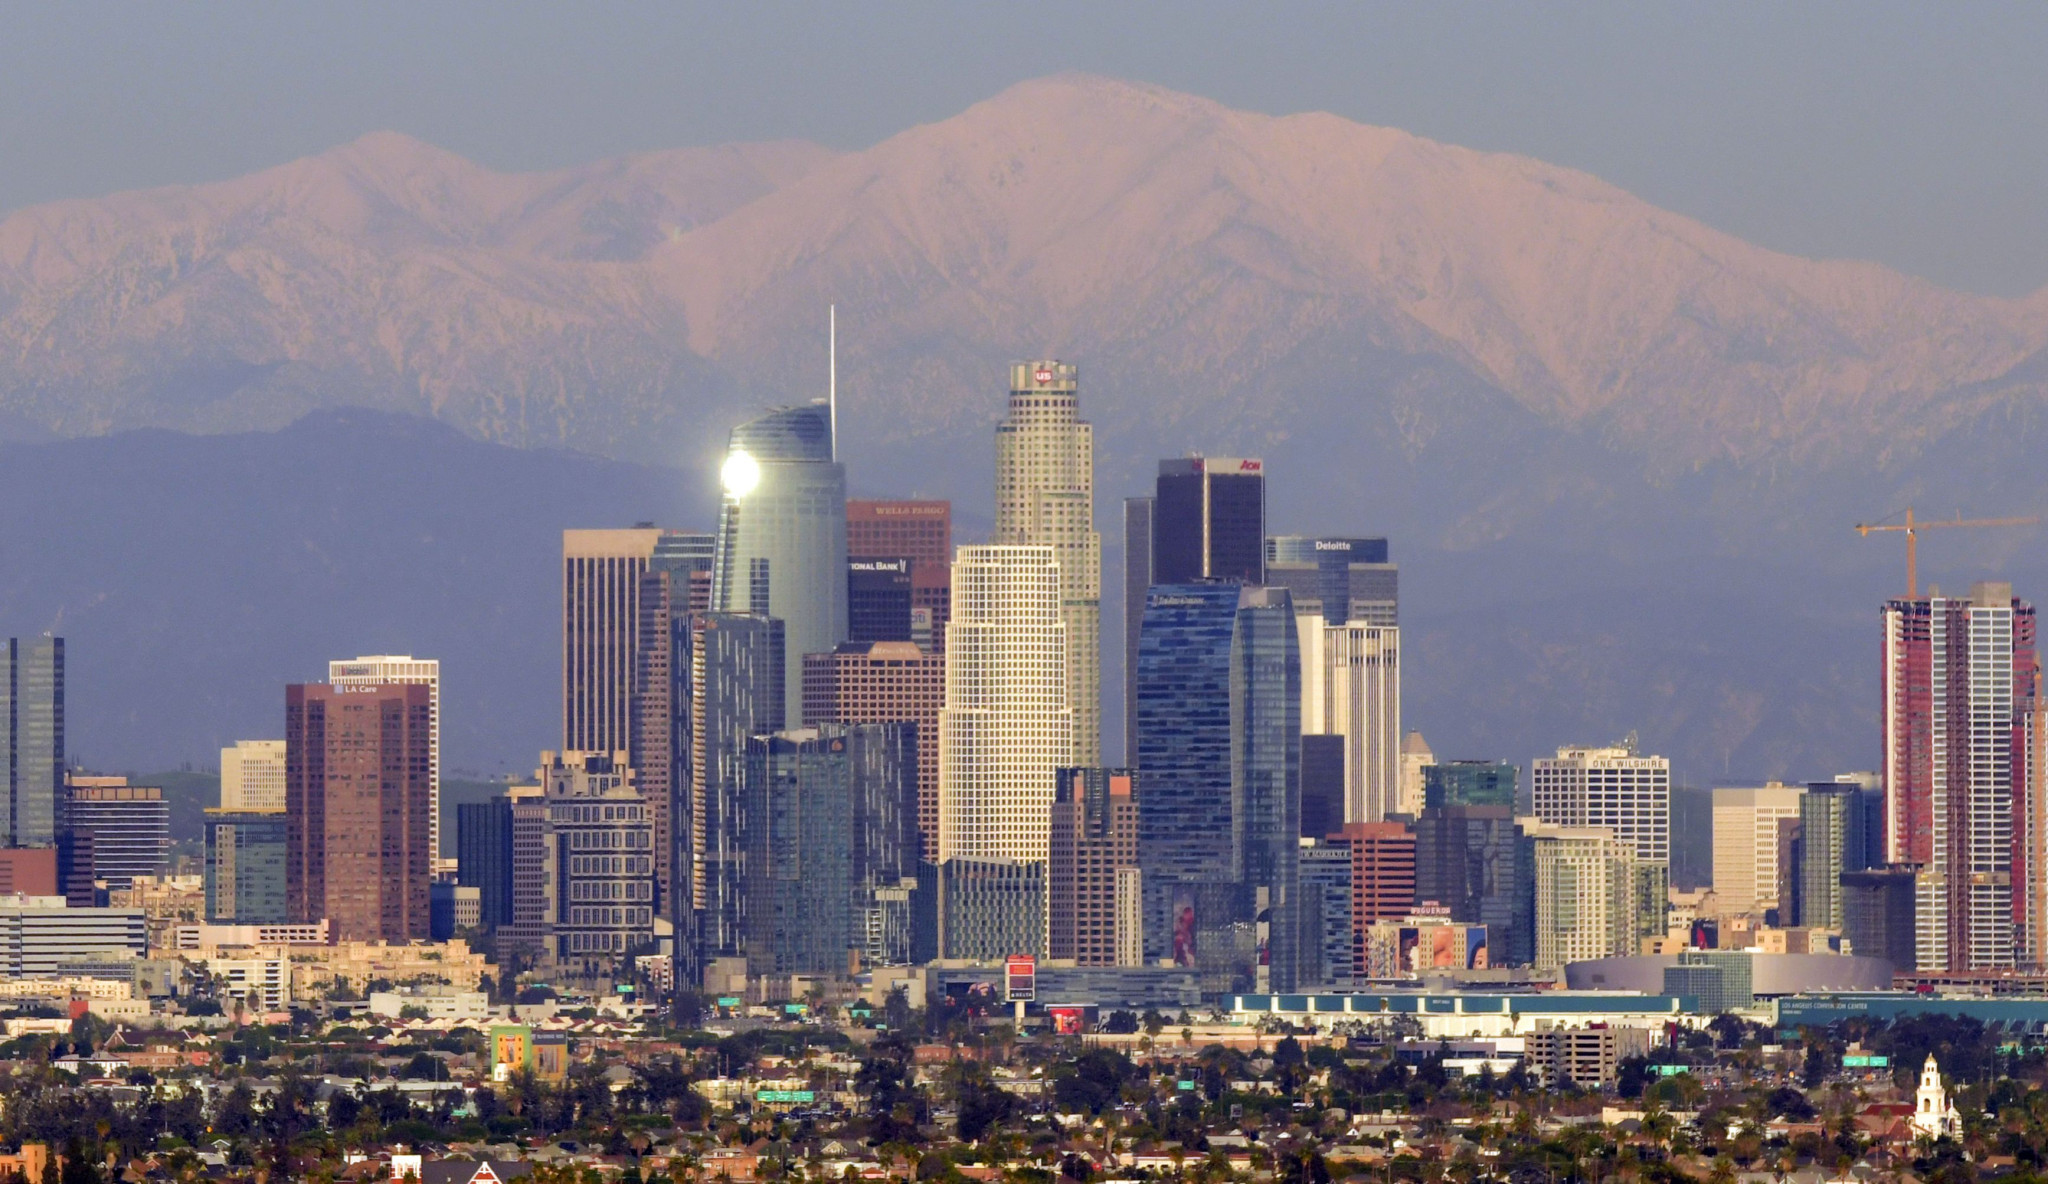 Los Angeles 2028 has today released its "privately-funded, balanced budget" ©Getty Images